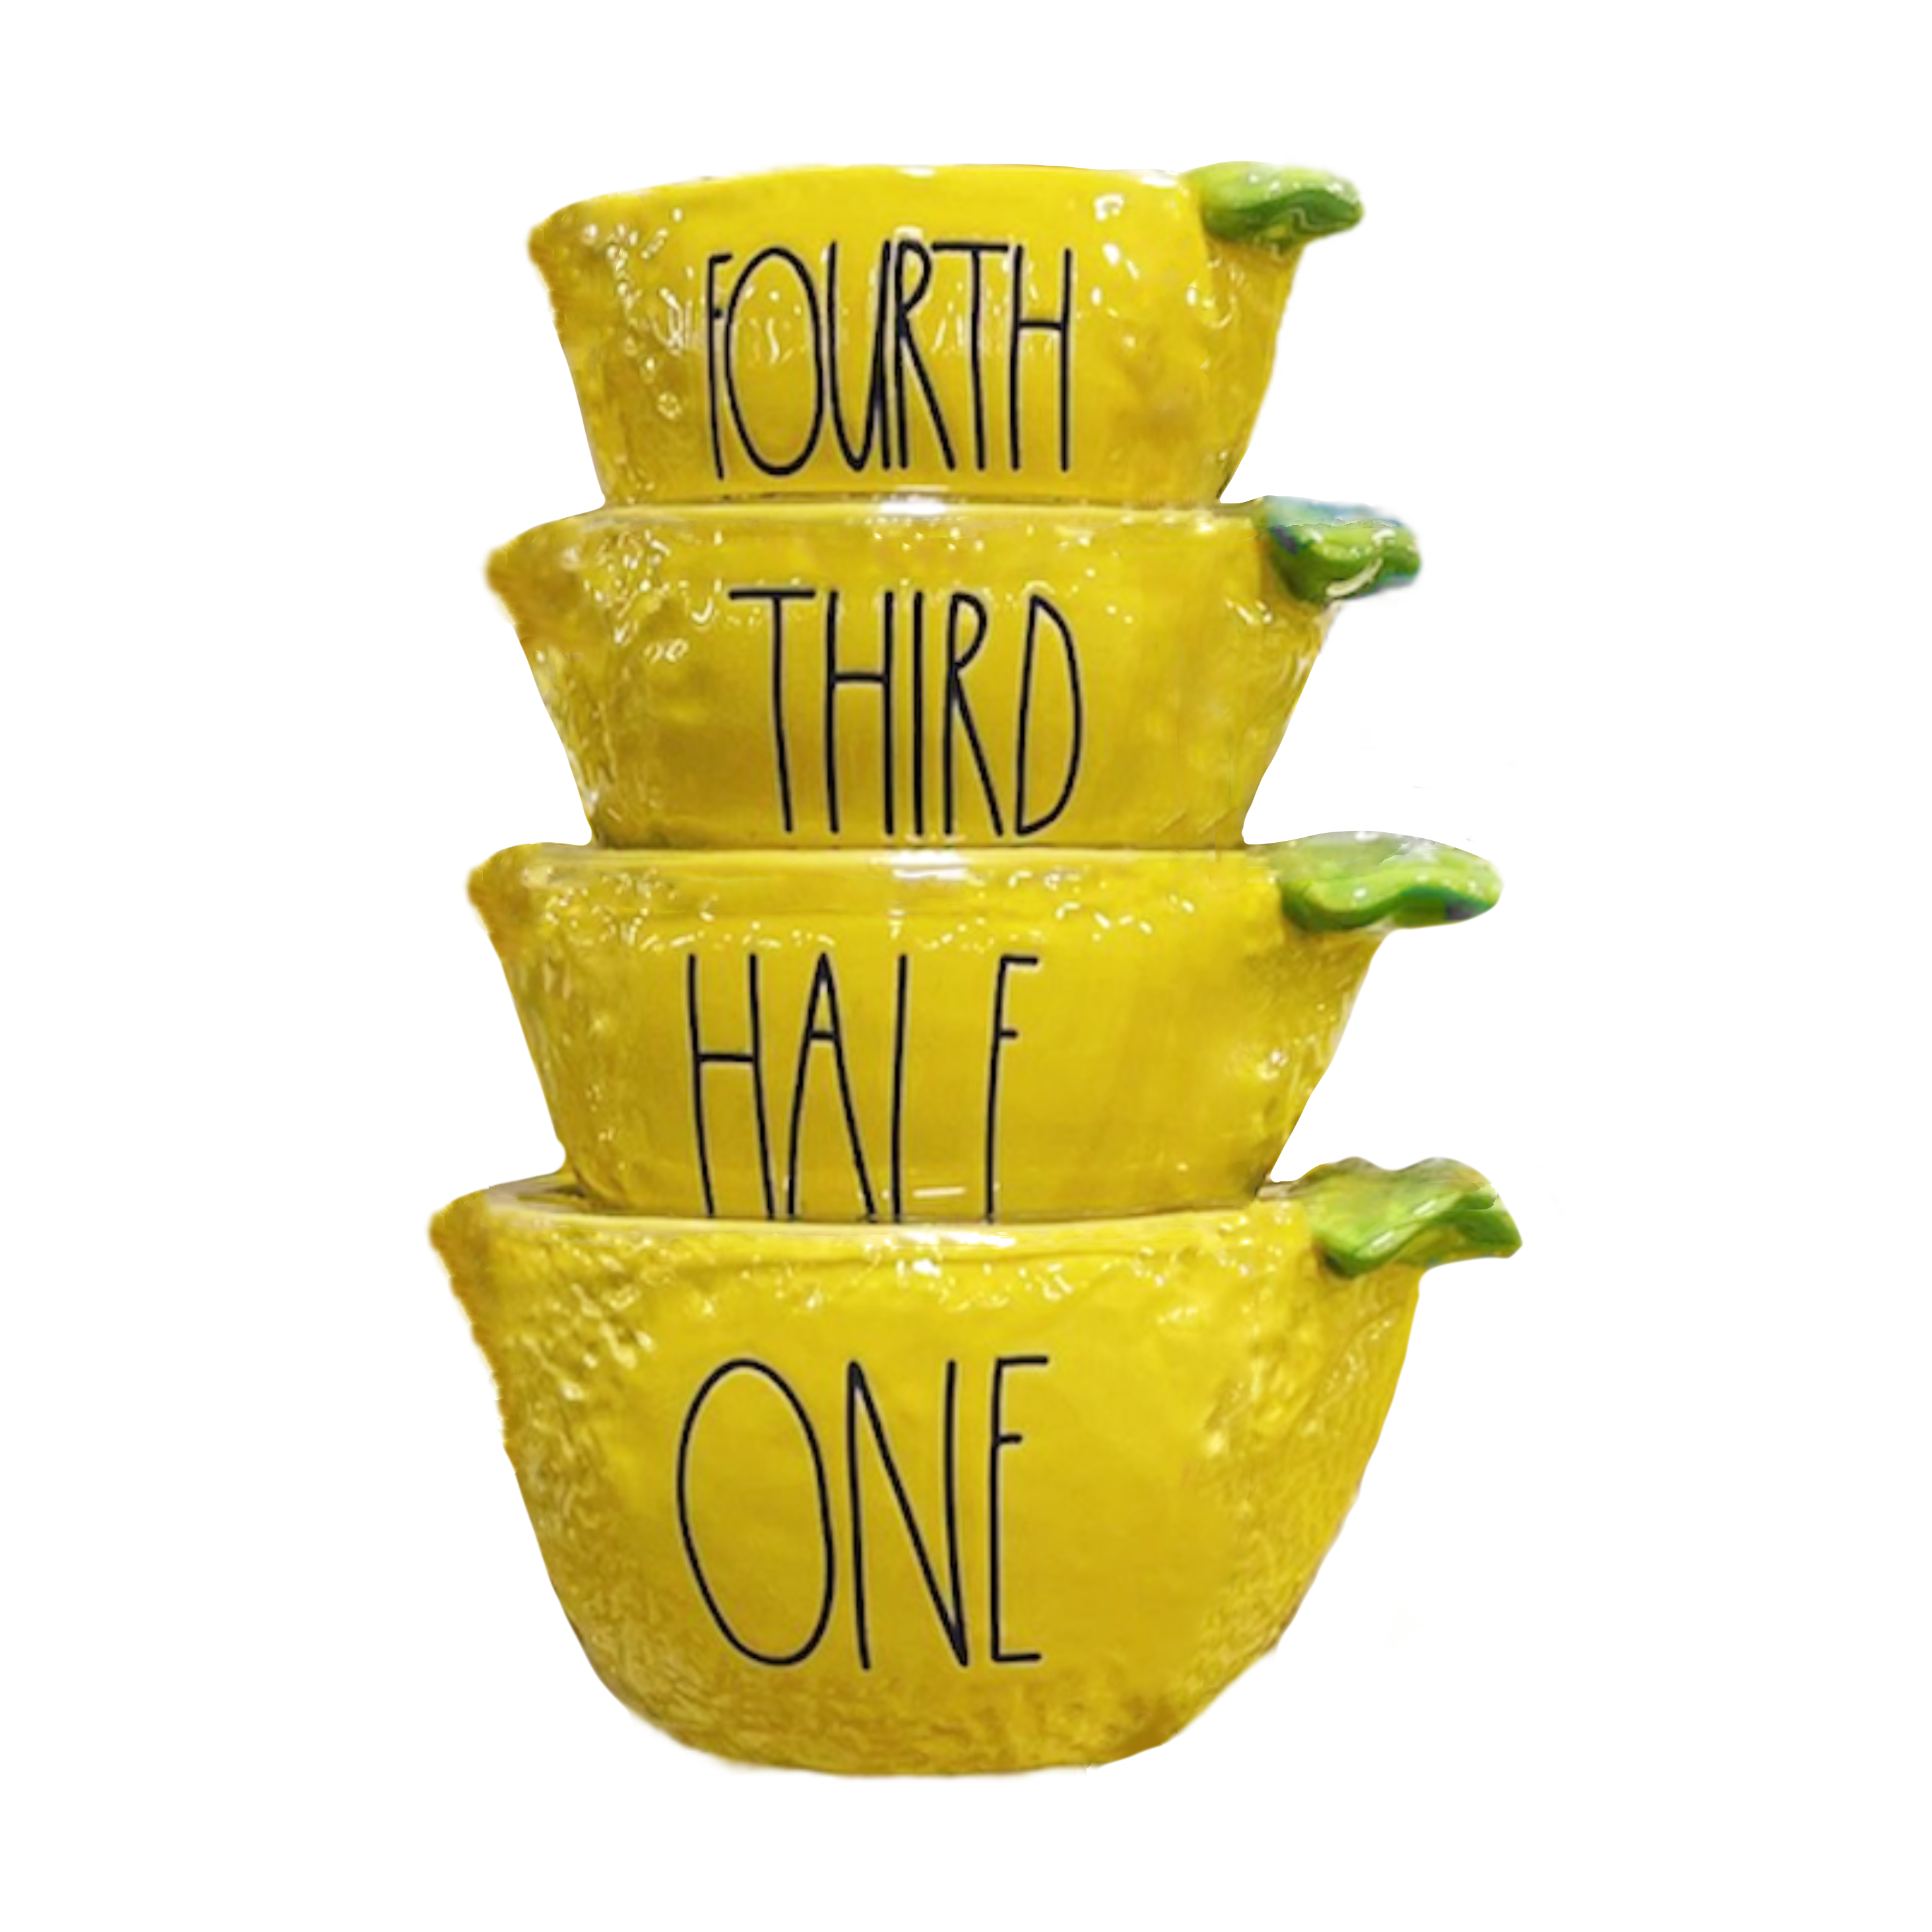 Rae Dunn Yellow Speckled Ceramic Measuring Cups Black Lettering 4-piece set  includes 1 each of One Half Third Quarter Cup Kitchen